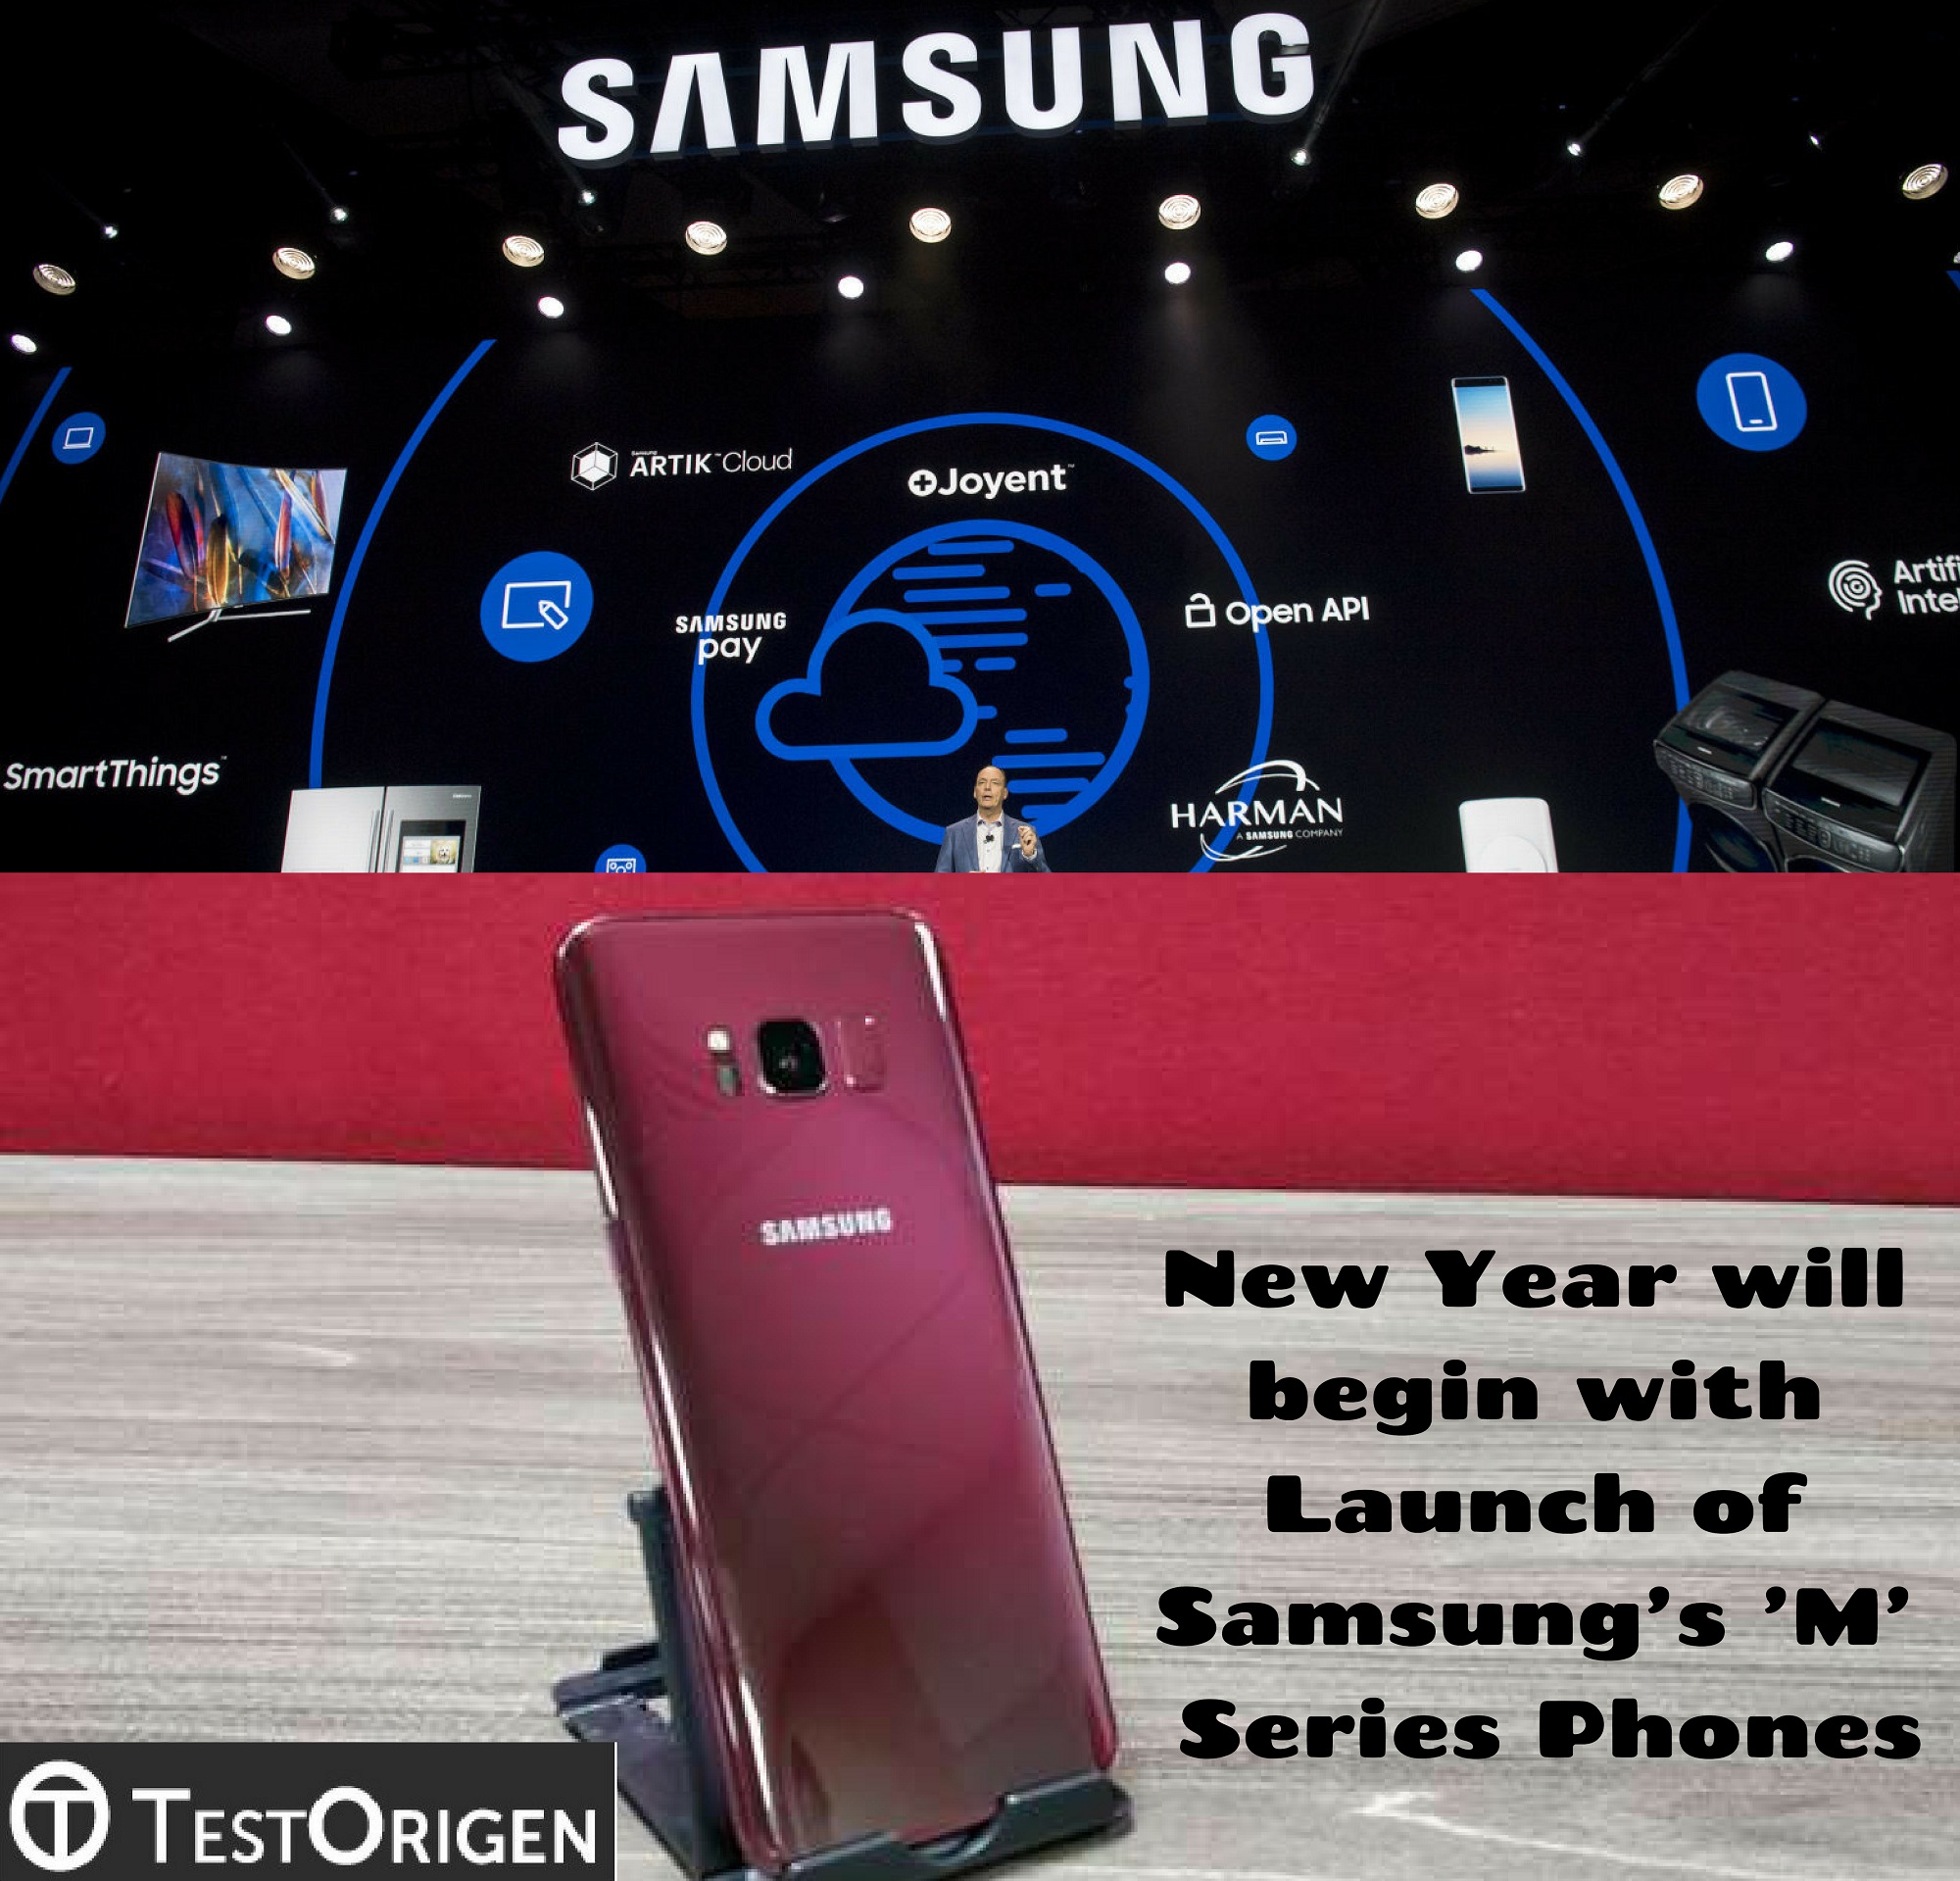 New Year will begin with Launch of Samsung’s ’M’ Series Phones